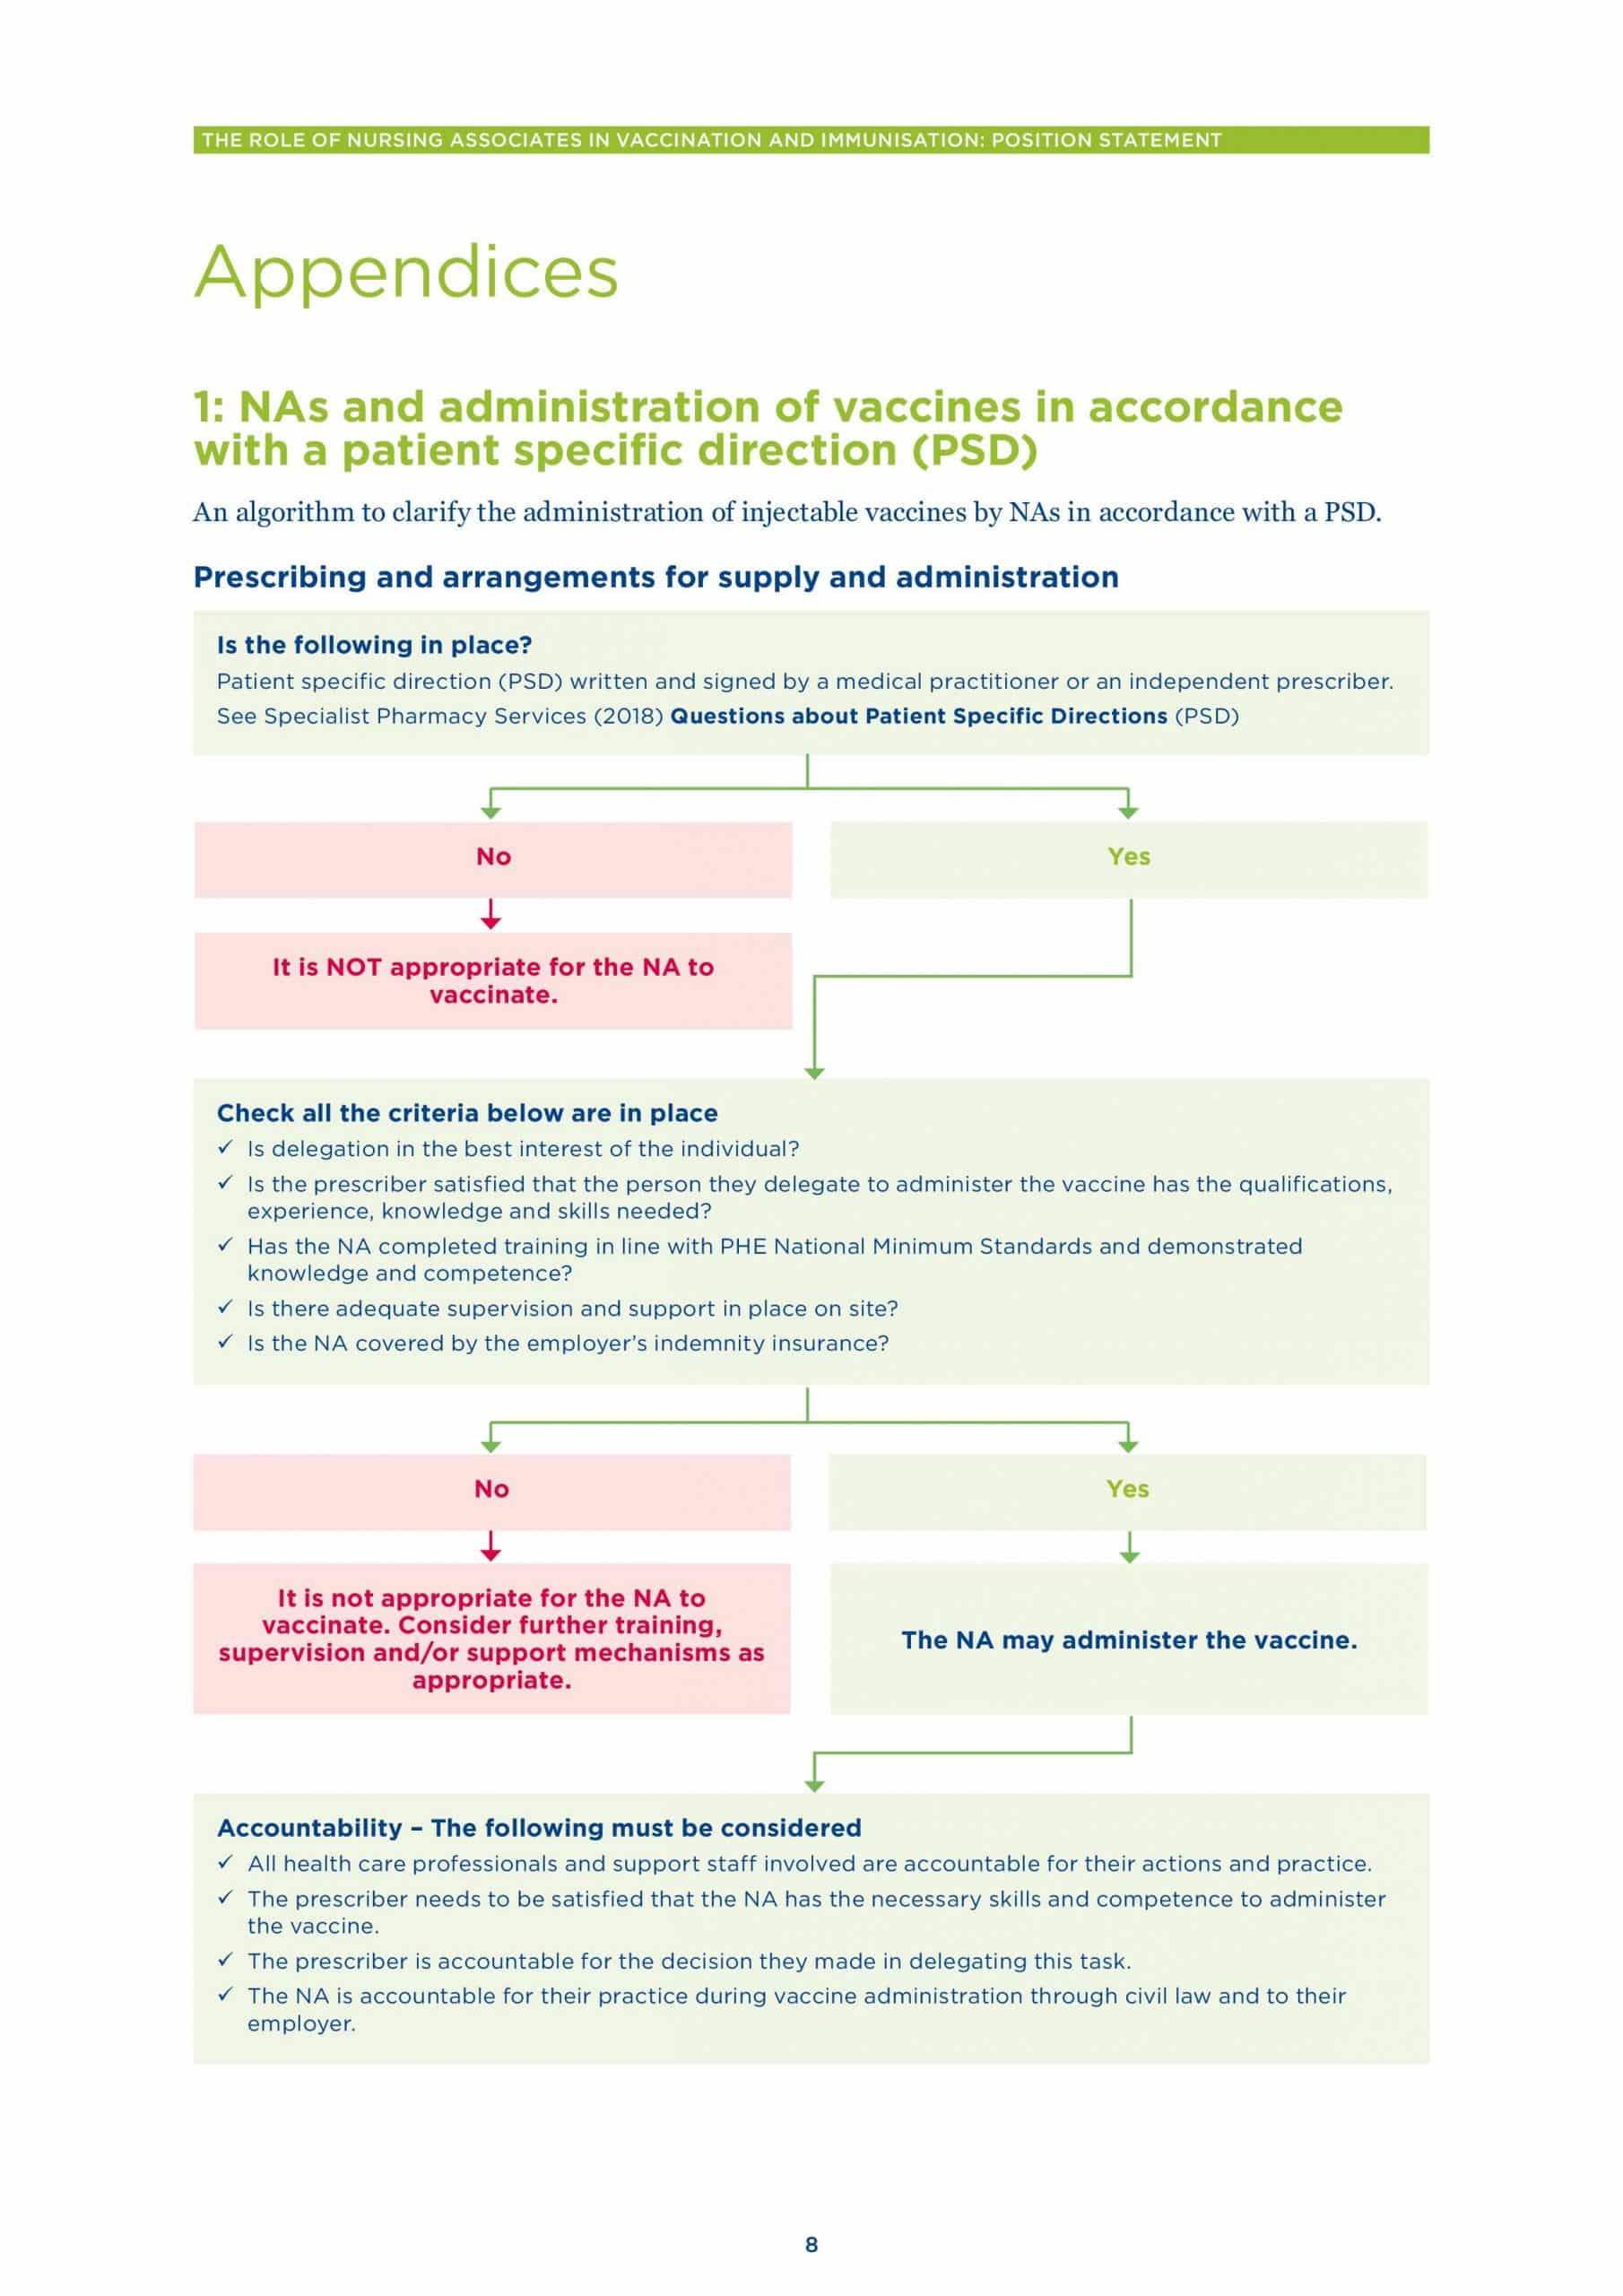 The Role of Nursing Associates in Vaccination and Immunisation (RCN, 2019) (1)-7